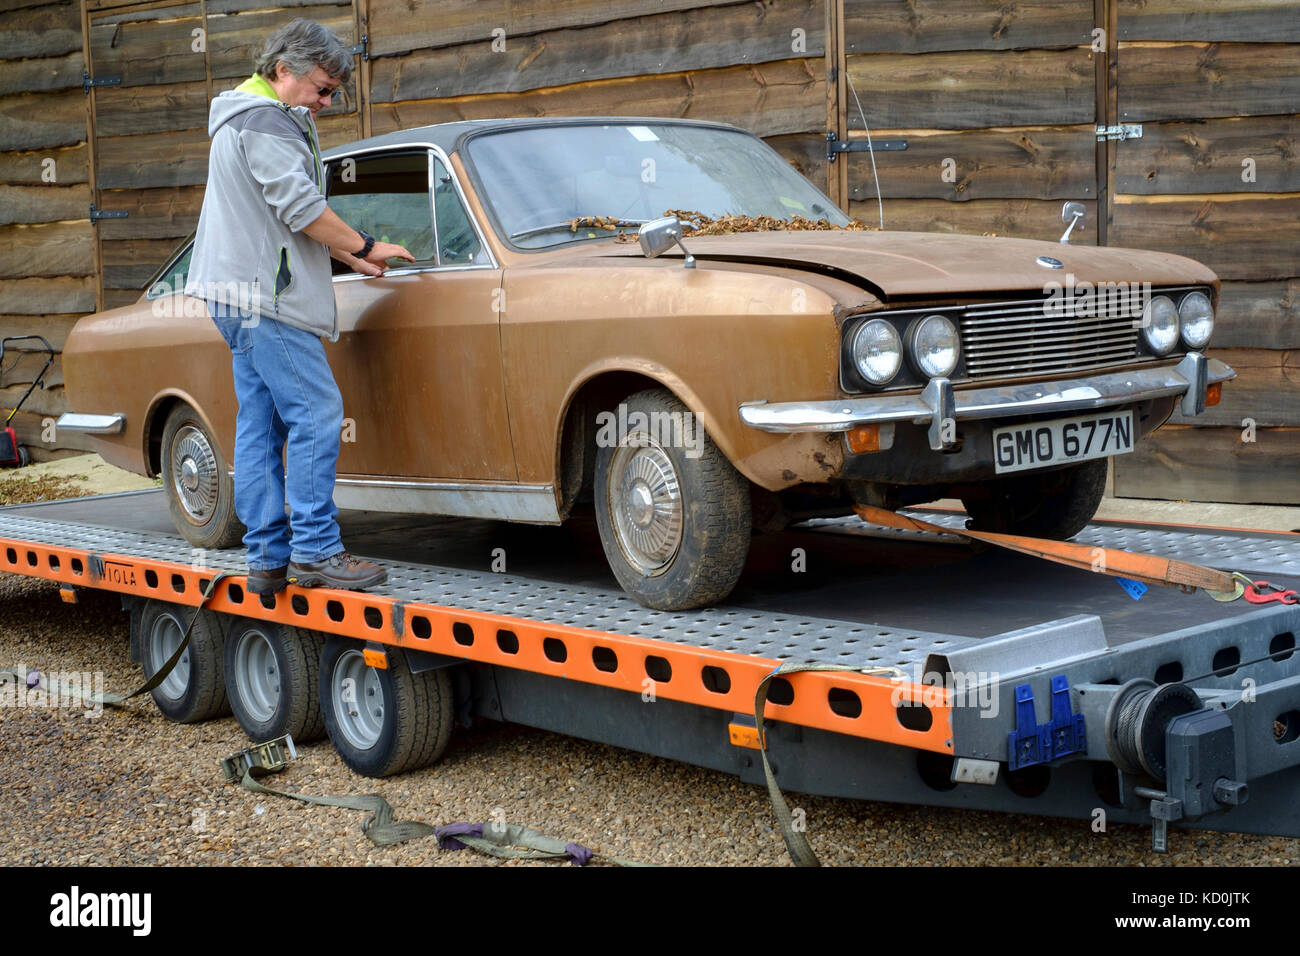 a barn find of a british sunbeam rapier car from the 1970s ready for restoration as a project is loaded onto a trailer Stock Photo